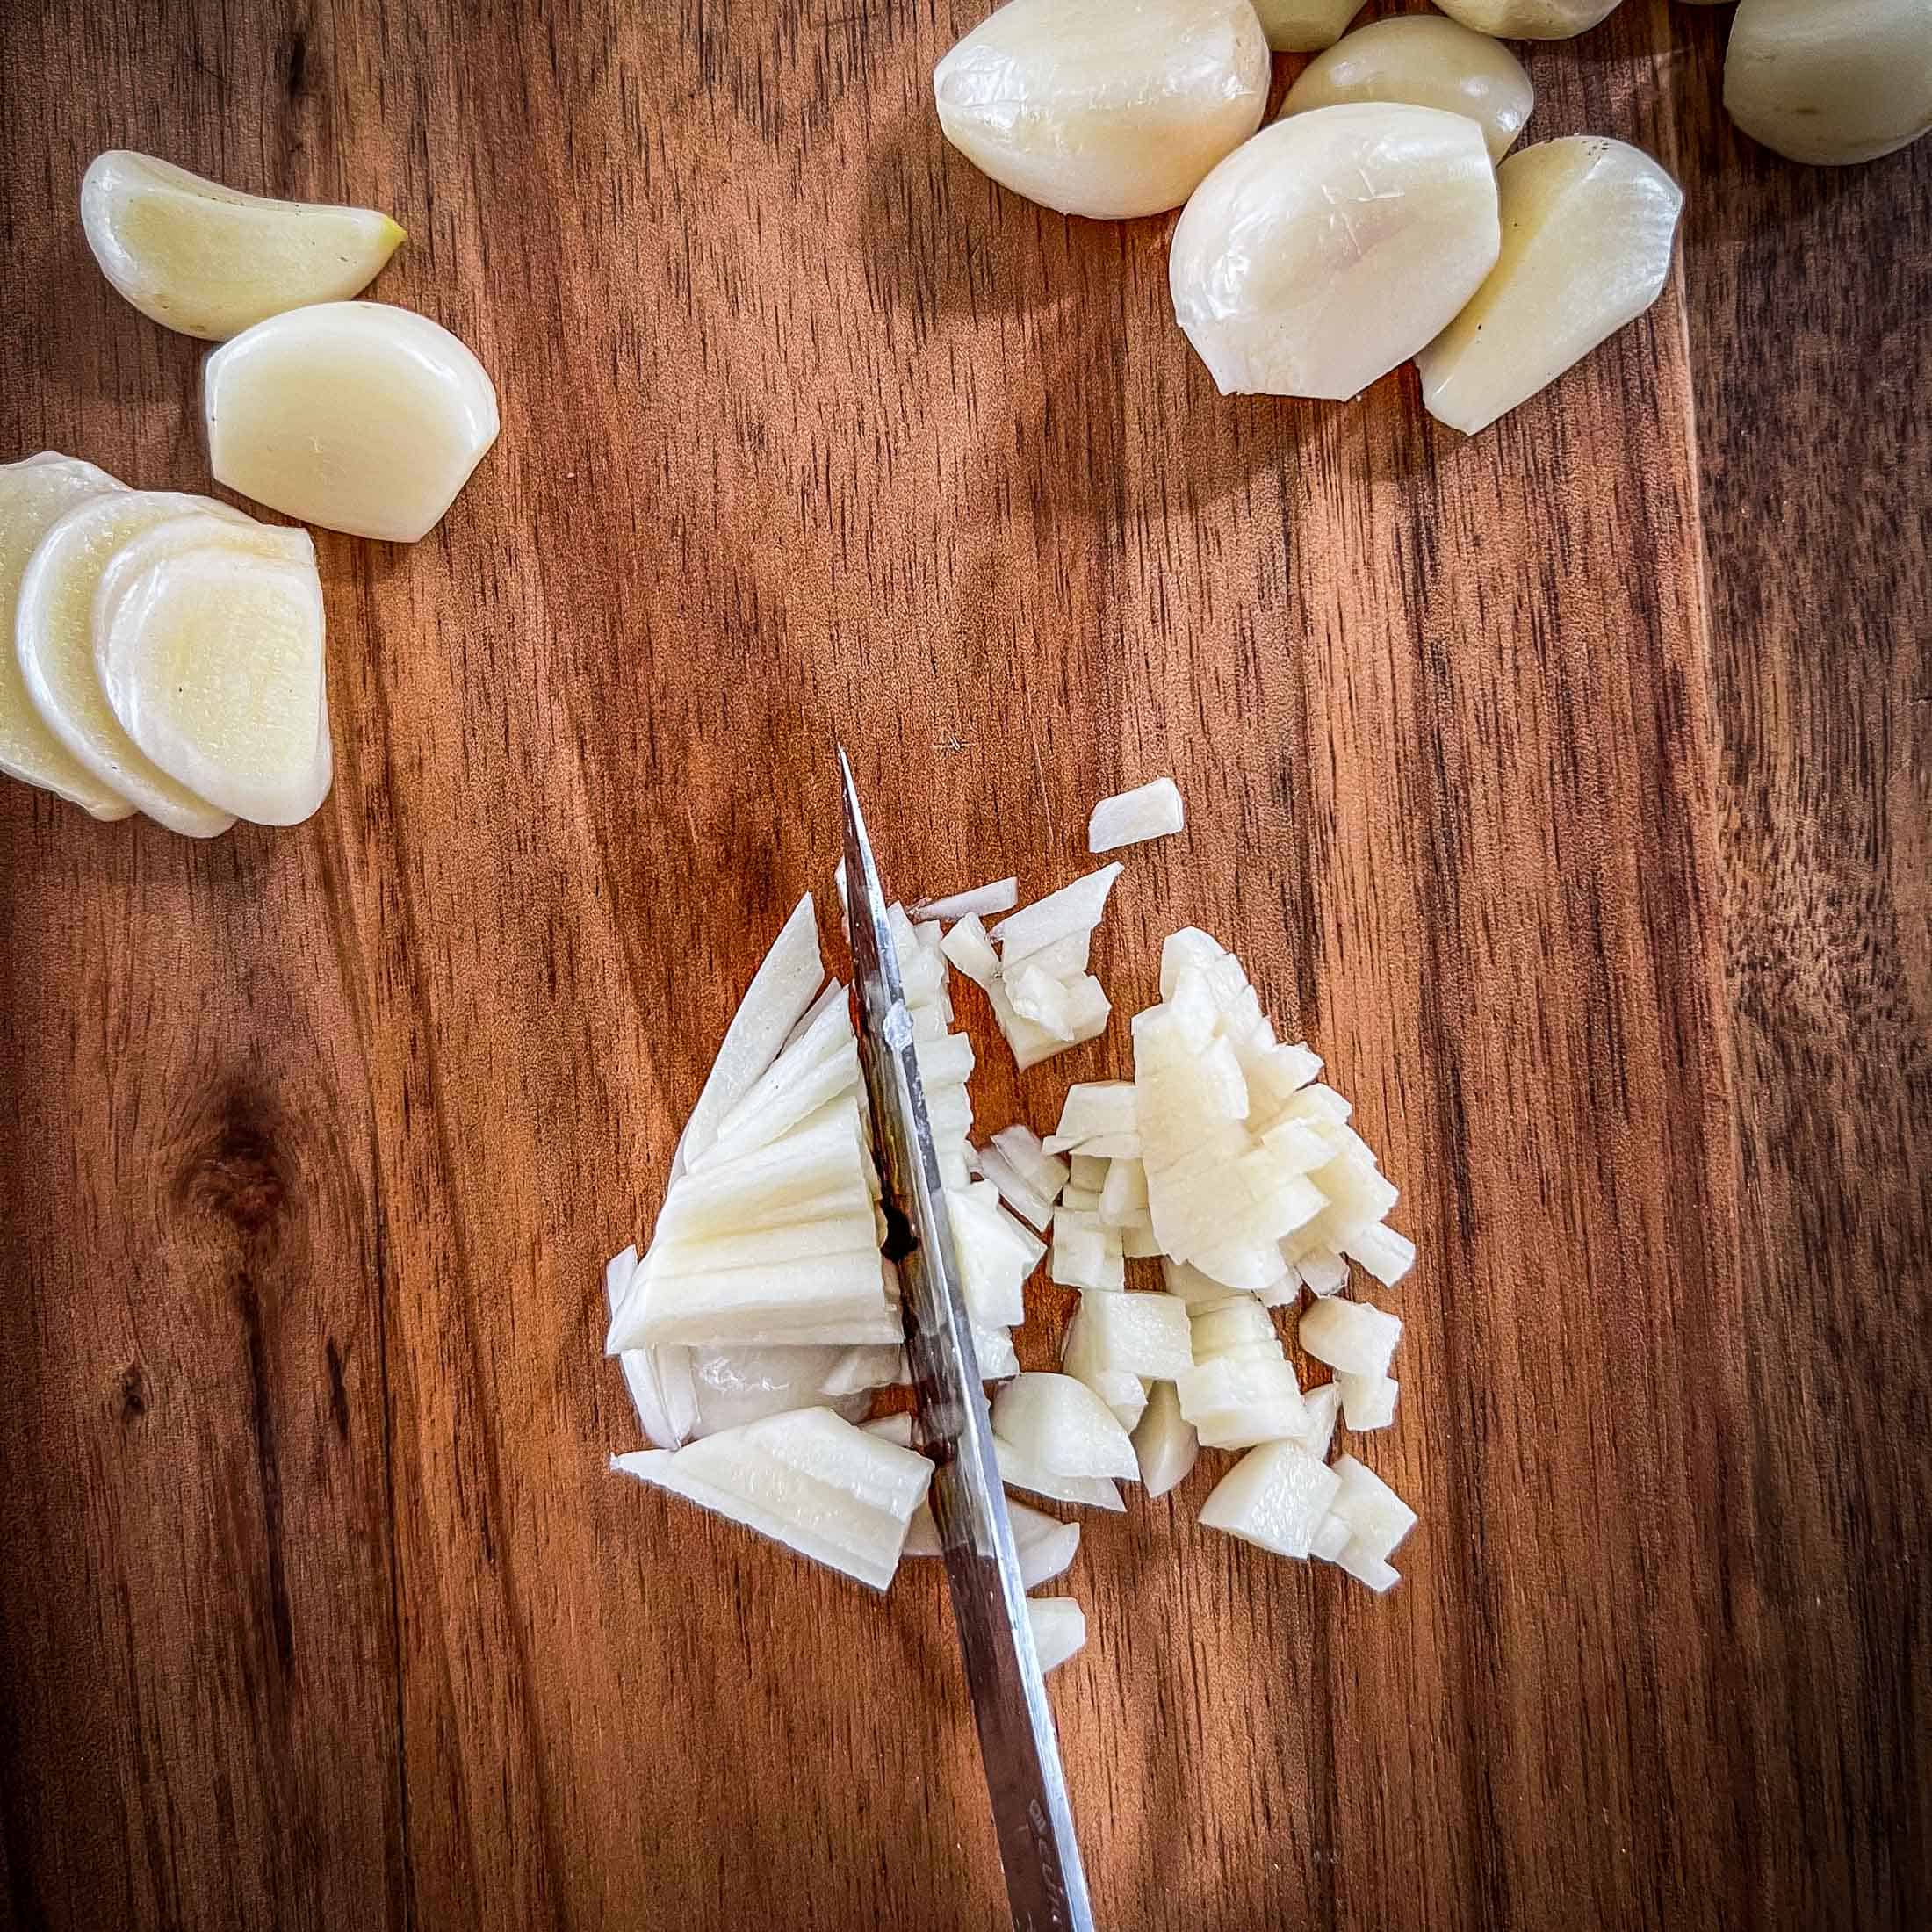 Finely mincing a raw clove of garlic with a sharp knife.